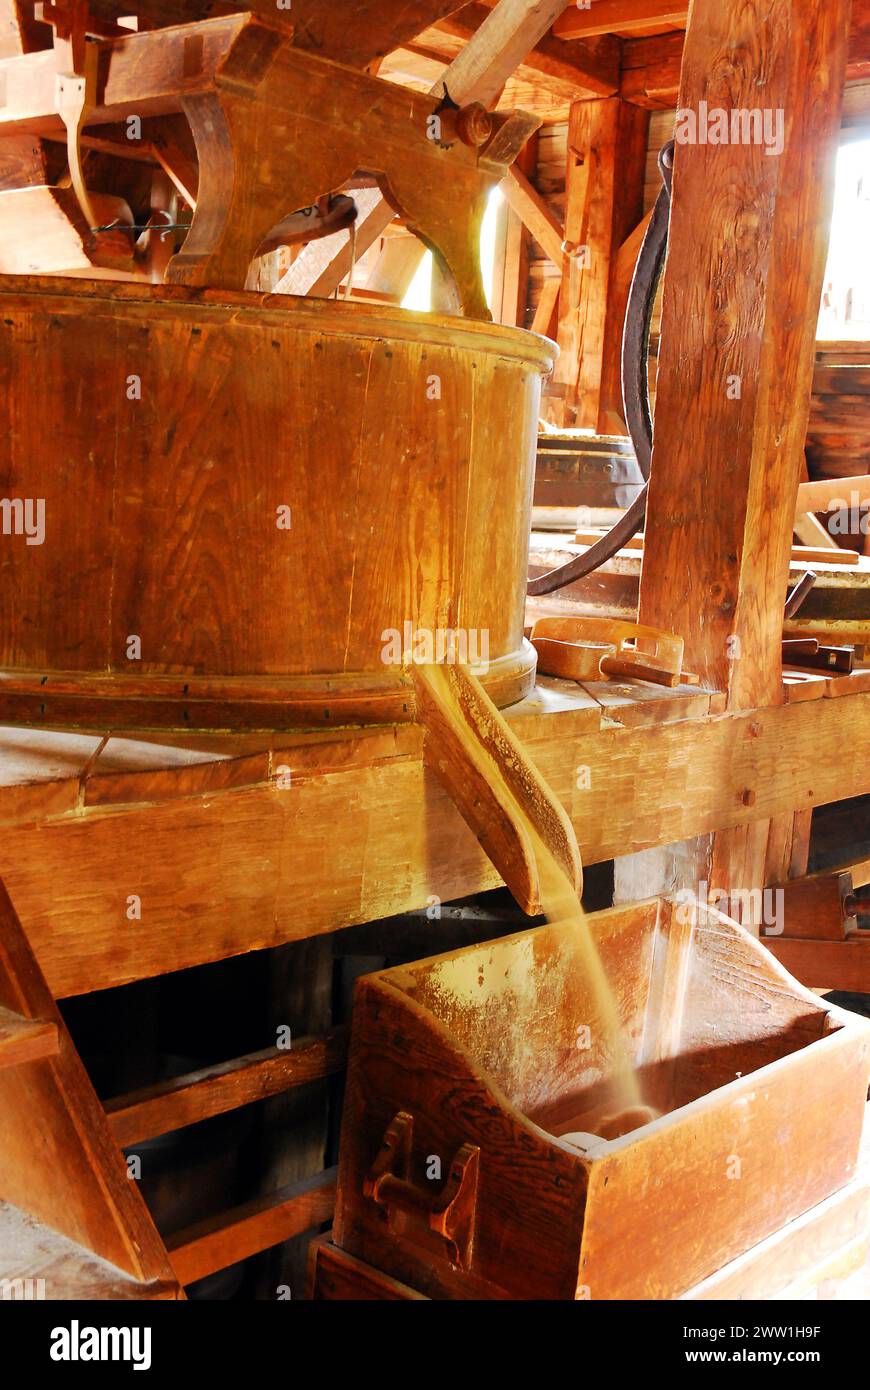 Grain Spills out of a Wooden Hopper at a recreated mill in Historic Sleepy Hollow, New York Stock Photo